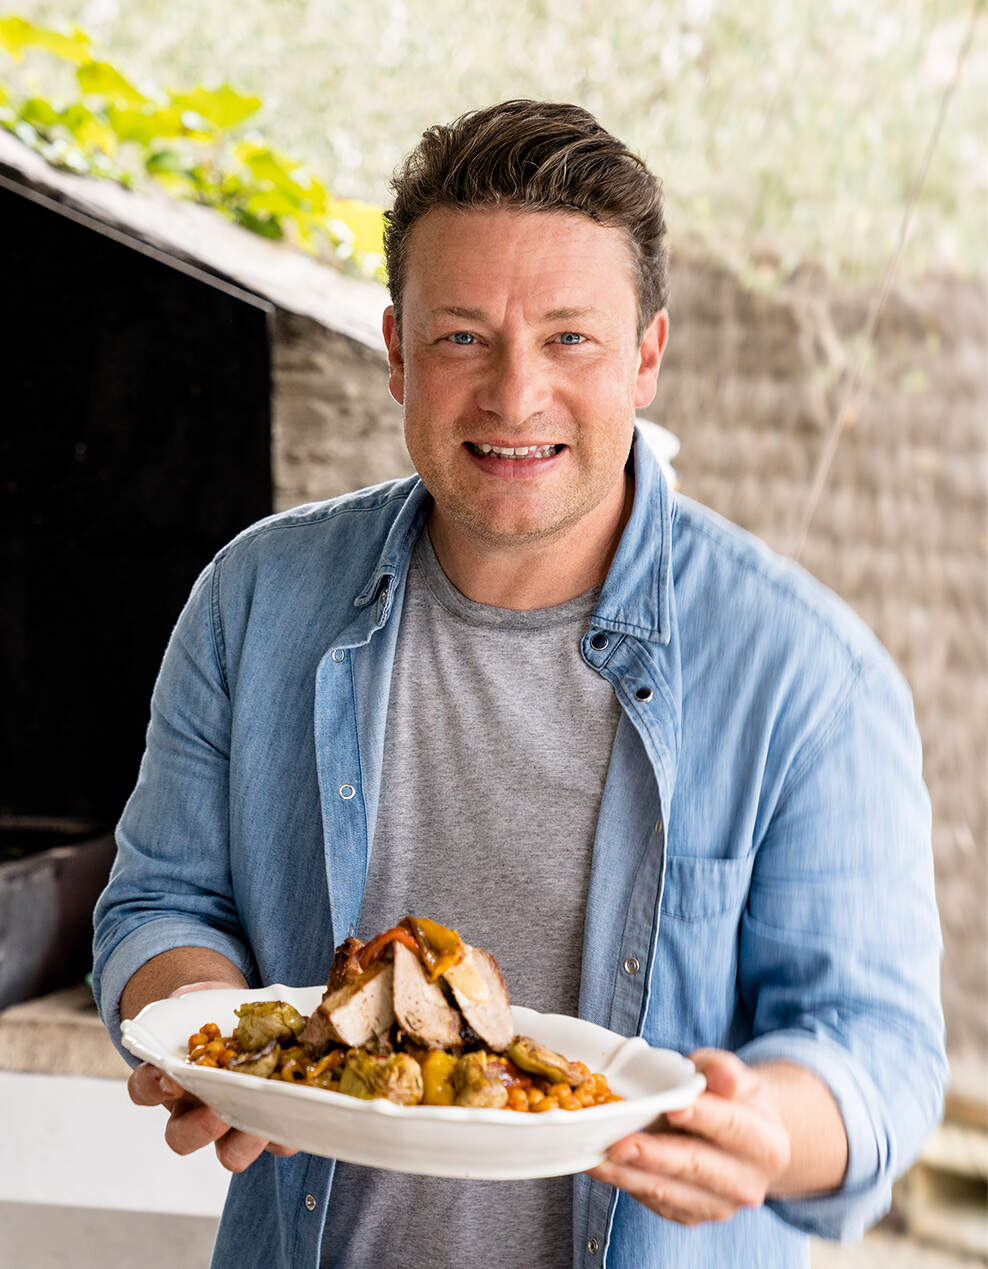 Jamie Oliver offers simple recipes with few ingredients in his new cookbook. (Chris Terry)